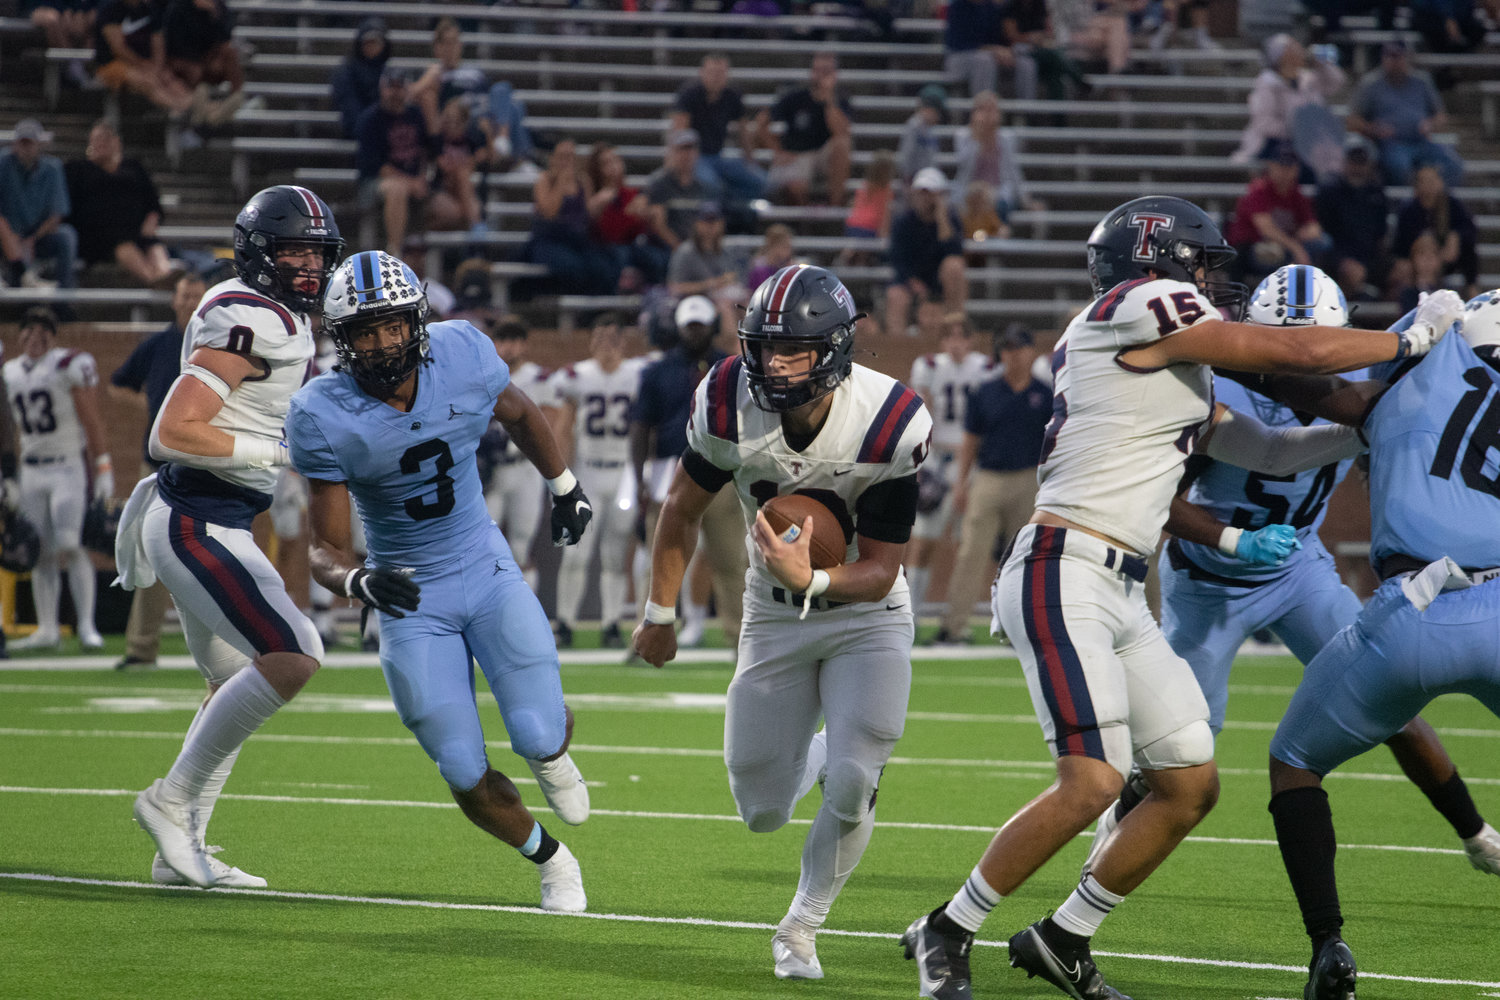 Tompkins' Wyatt Young runs during a game between Tompkins and Paetow at Rhodes Stadium.